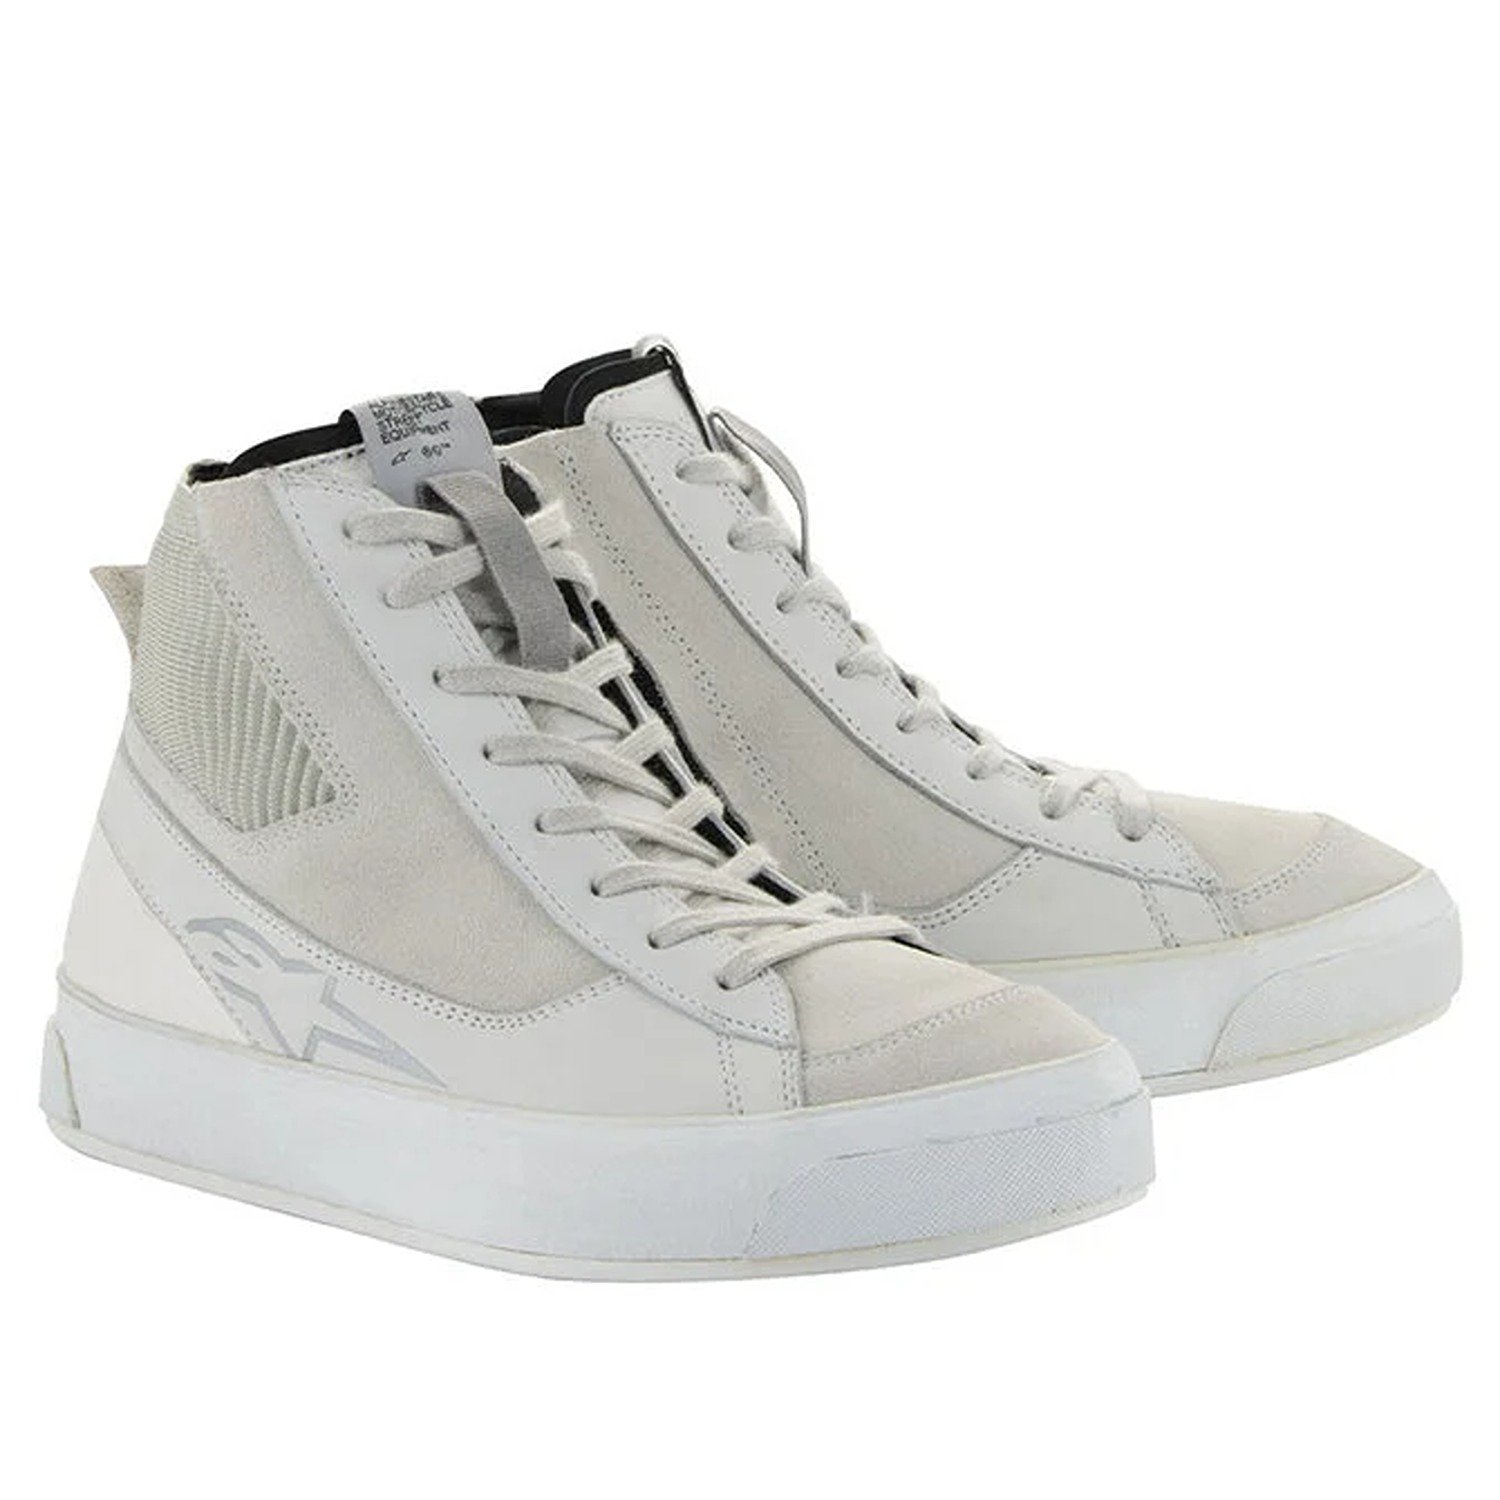 Image of Alpinestars Stated Shoes White Cool Gray Taille US 12